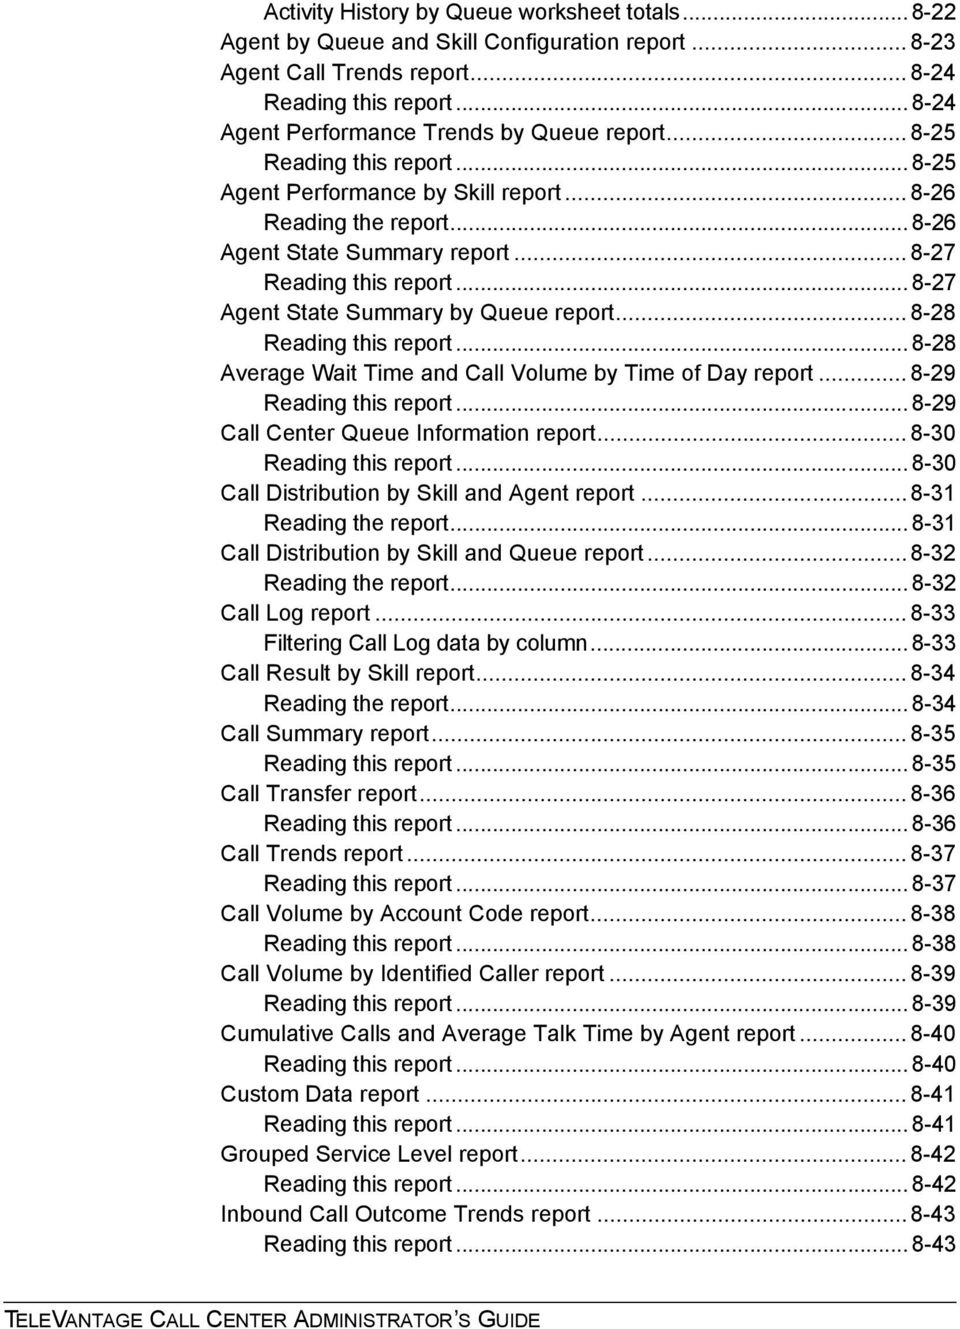 .. 8-27 Reading this report... 8-27 Agent State Summary by Queue report... 8-28 Reading this report... 8-28 Average Wait Time and Call Volume by Time of Day report... 8-29 Reading this report.